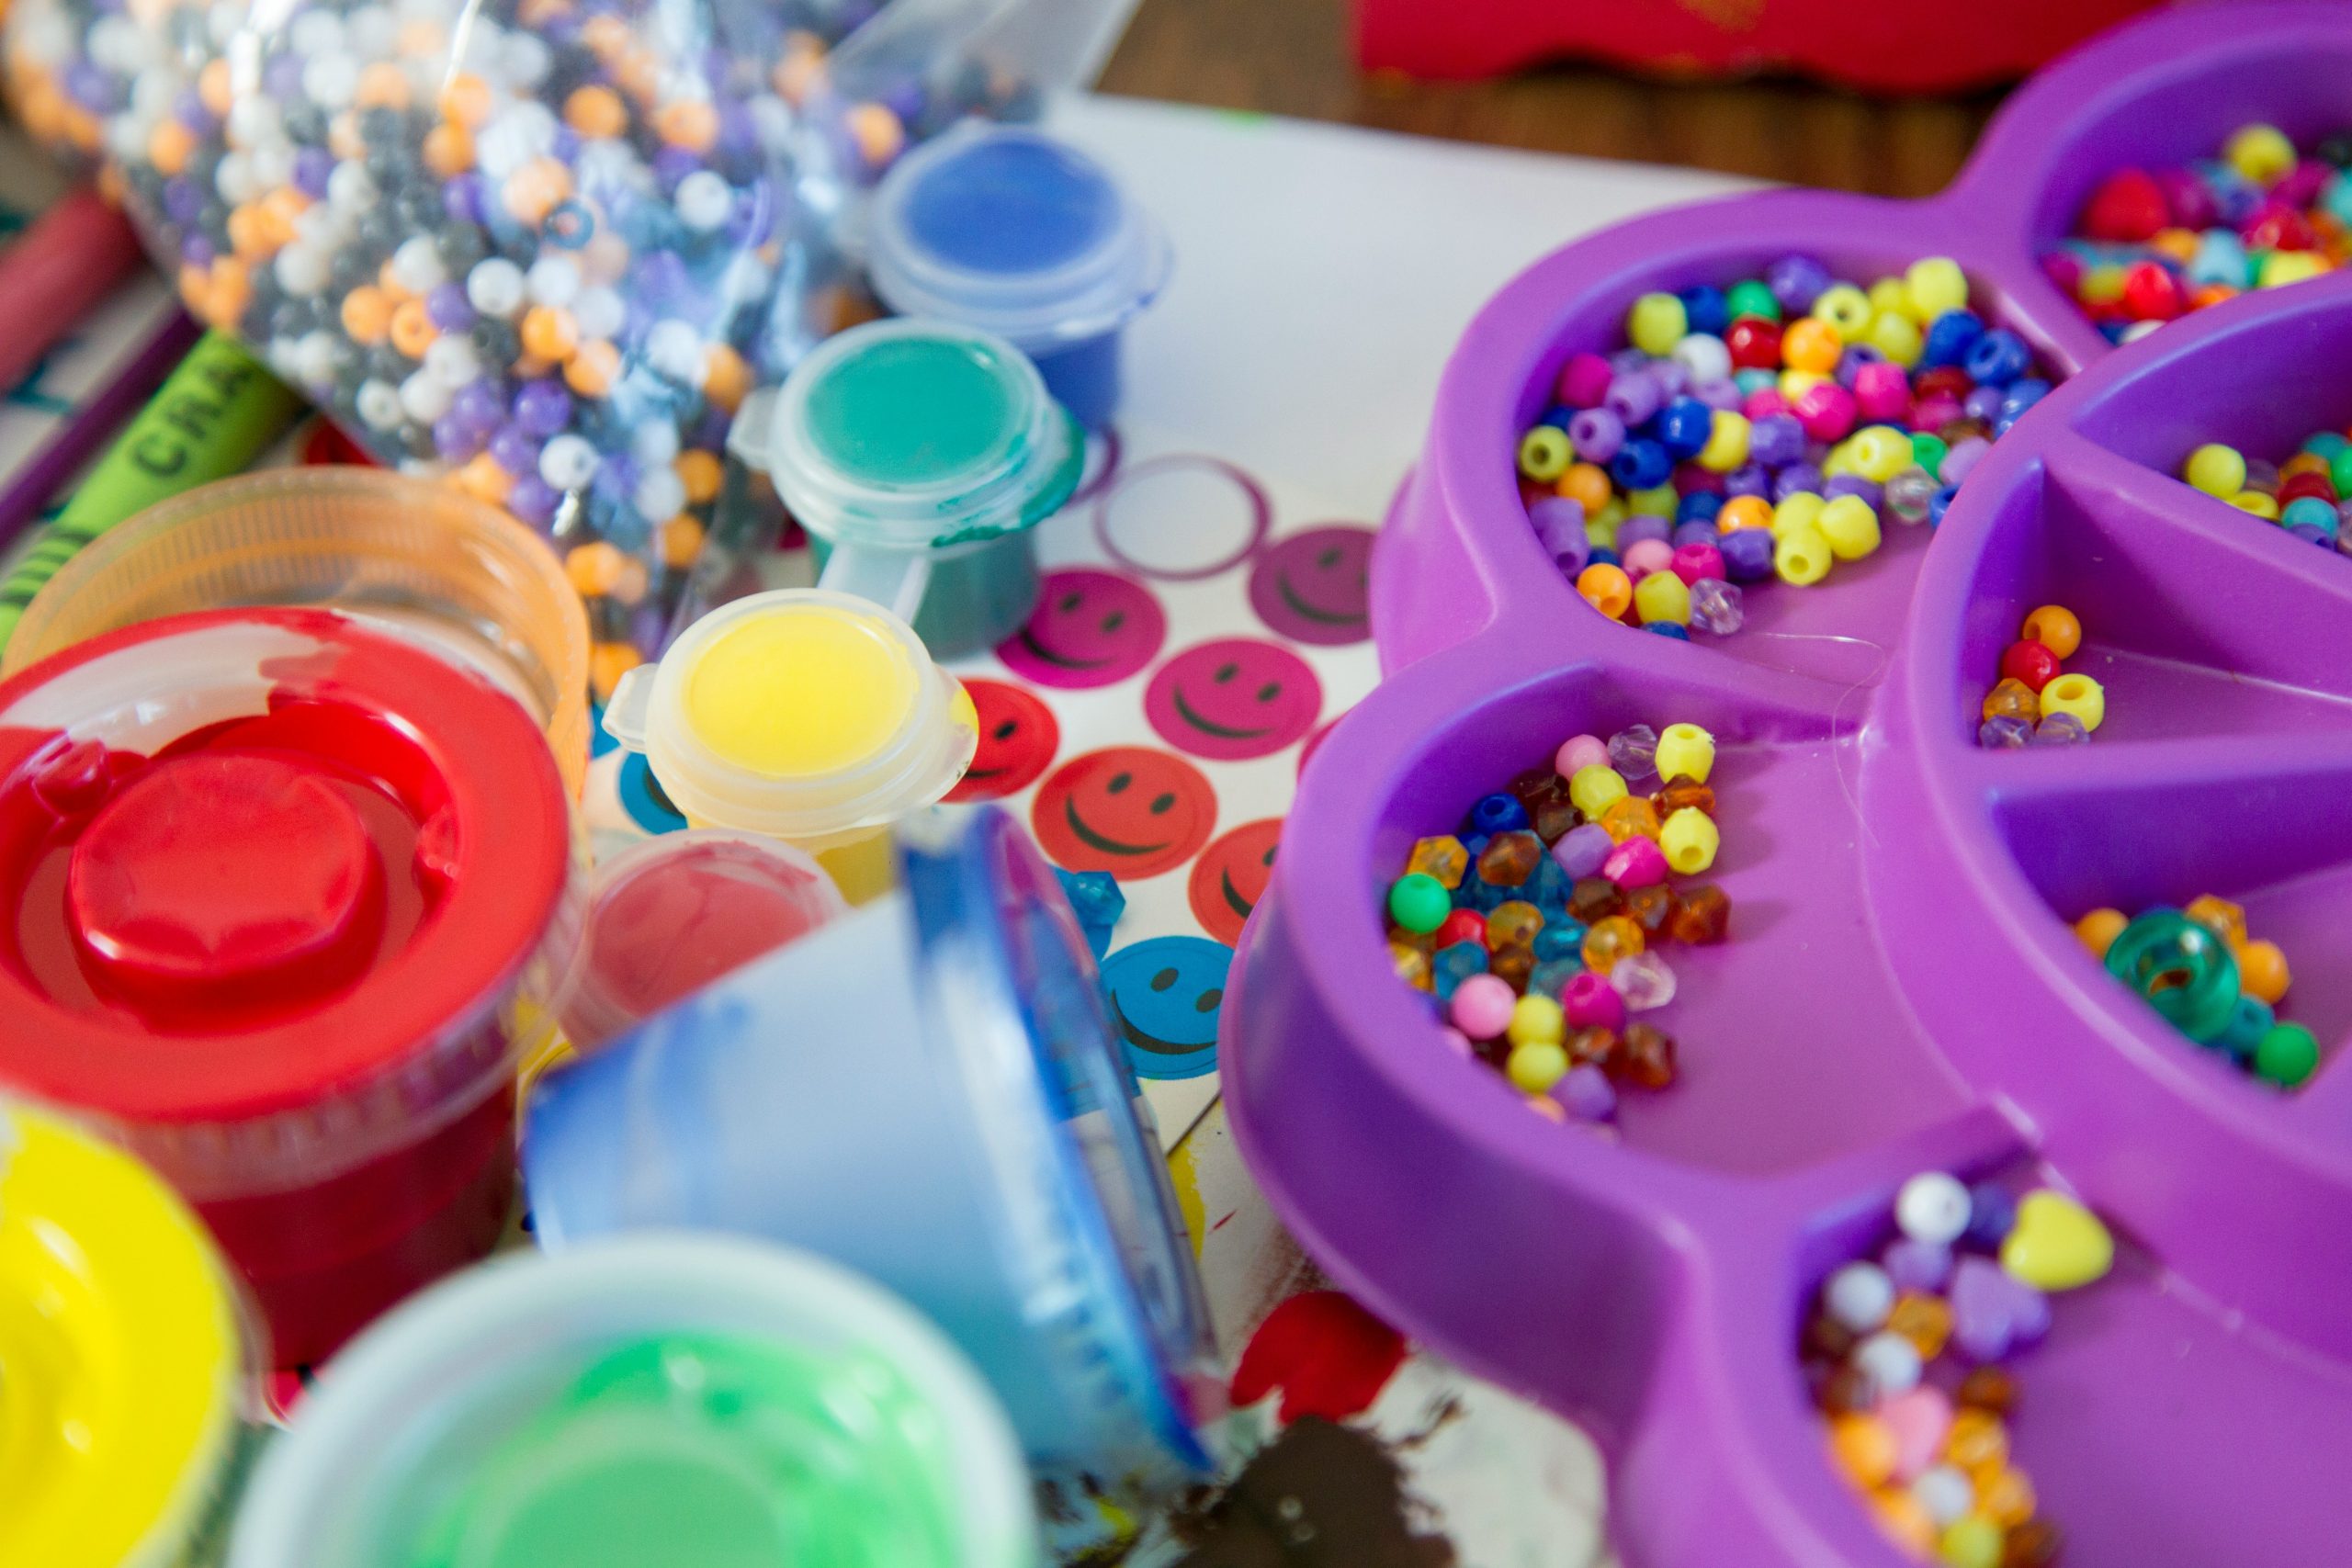 Colorful toys play a crucial role in sensory play